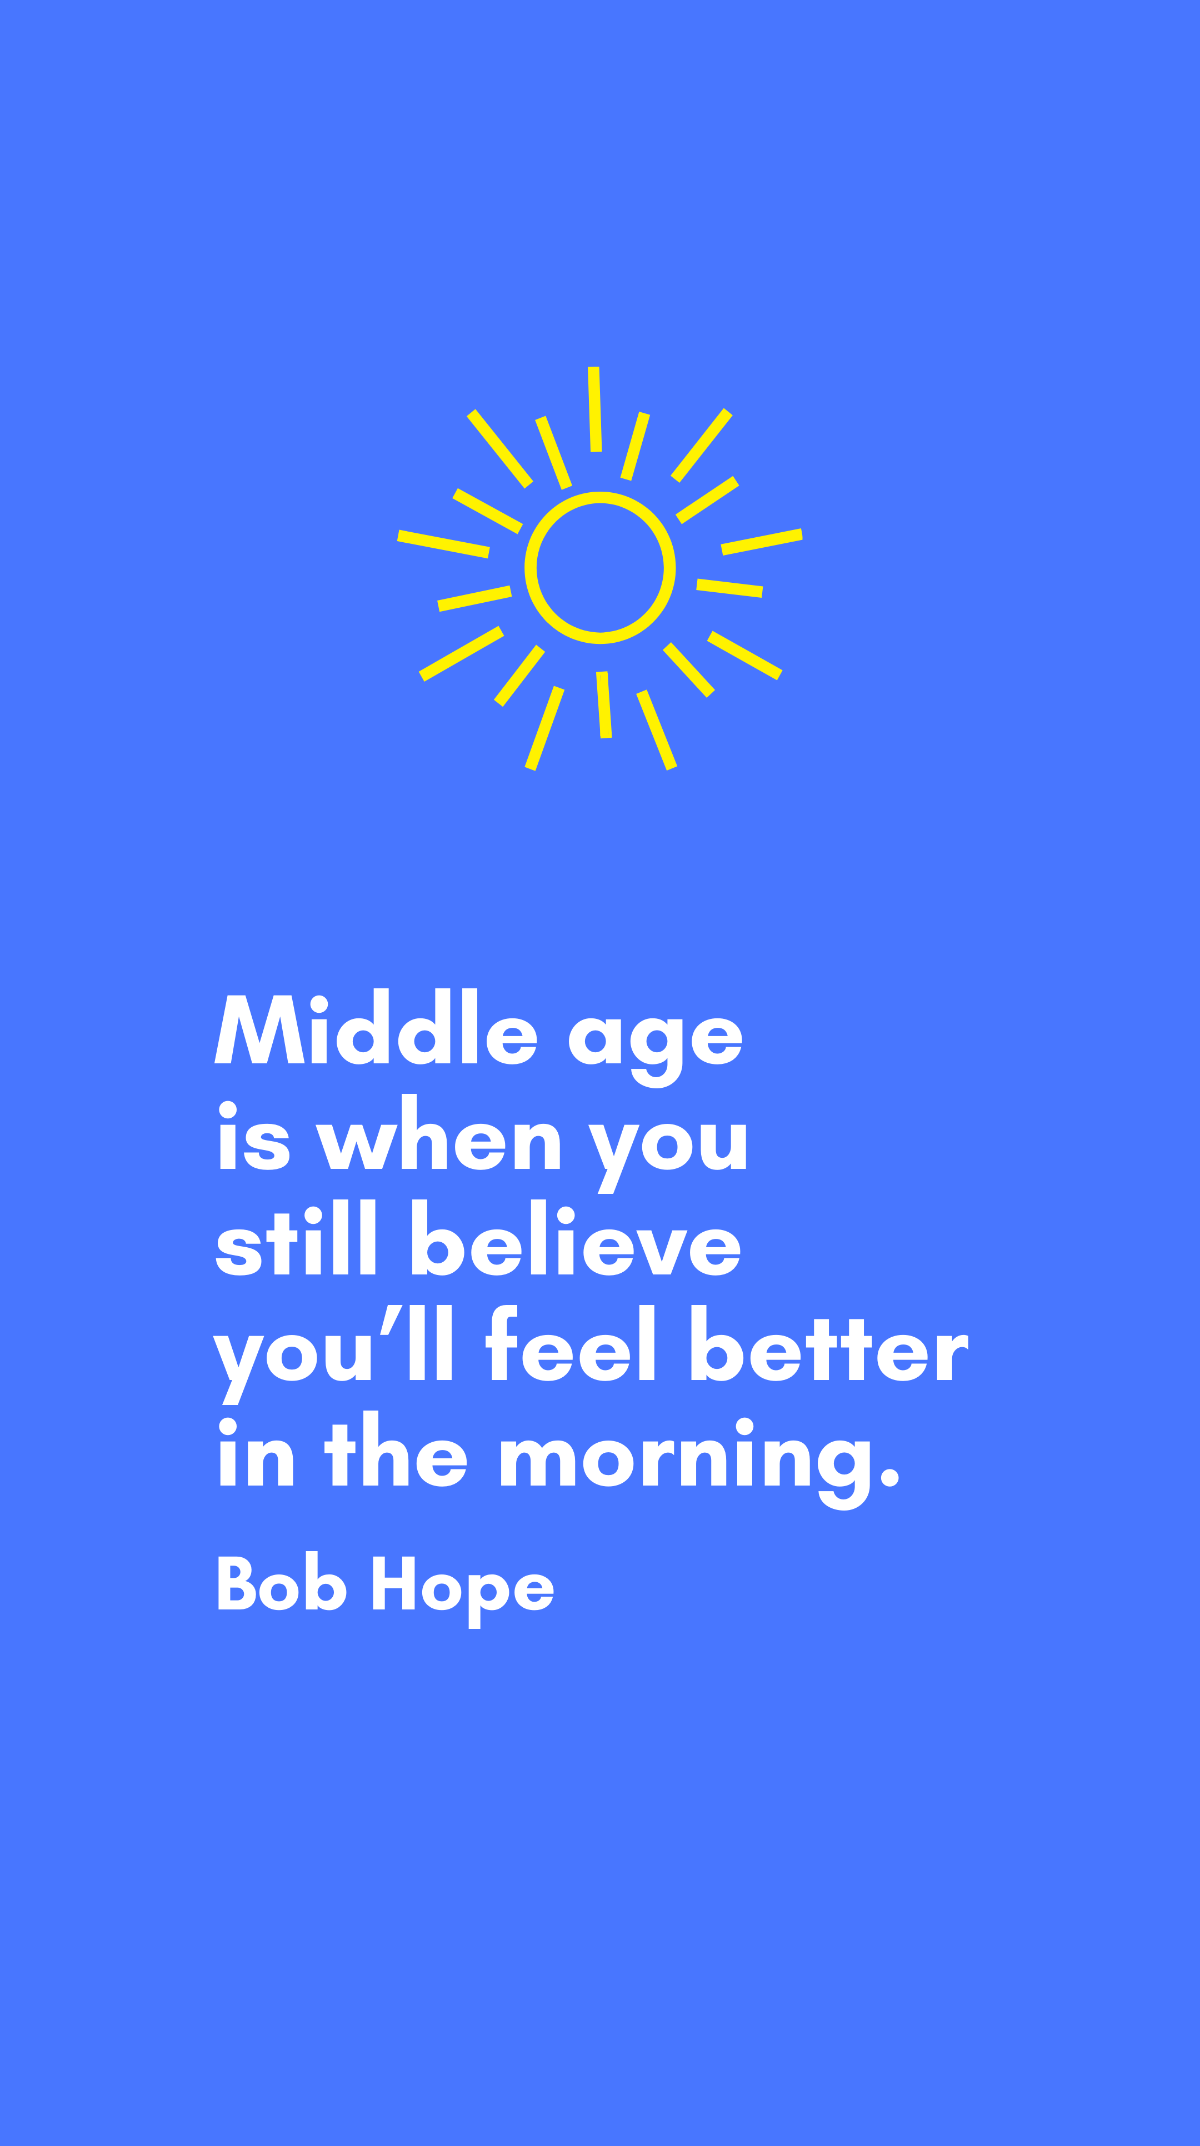 Bob Hope - Middle age is when you still believe you’ll feel better in the morning. Template